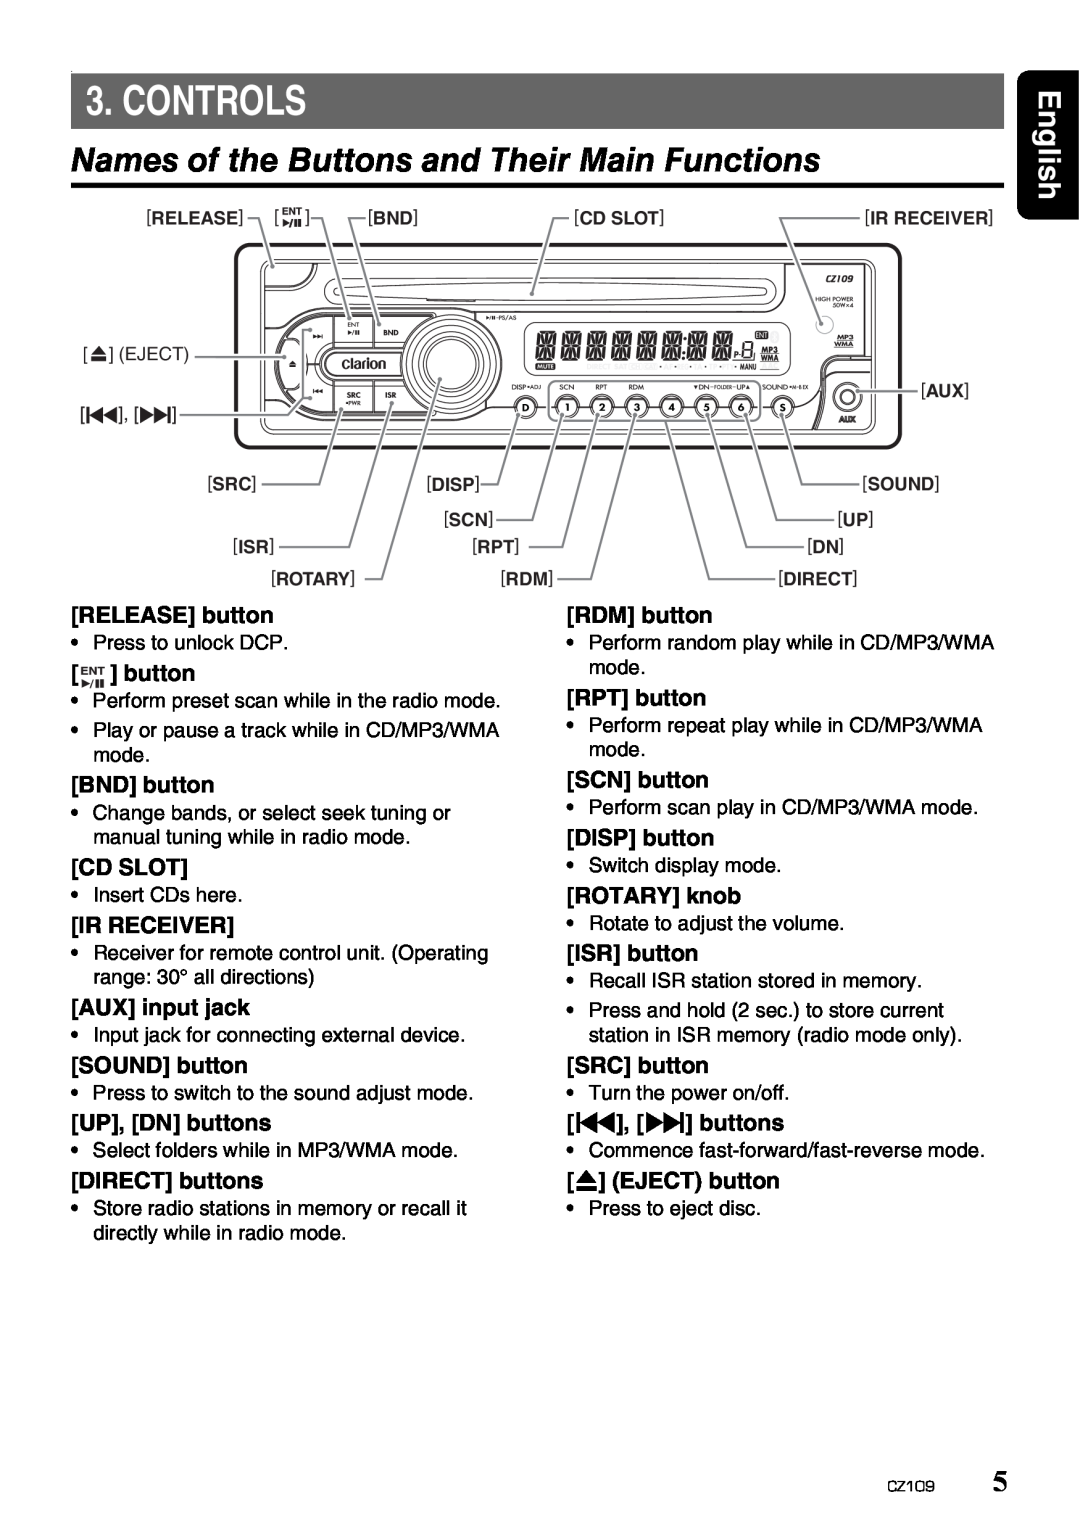 Clarion CZ109 owner manual Controls, Names of the Buttons and Their Main Functions, English 